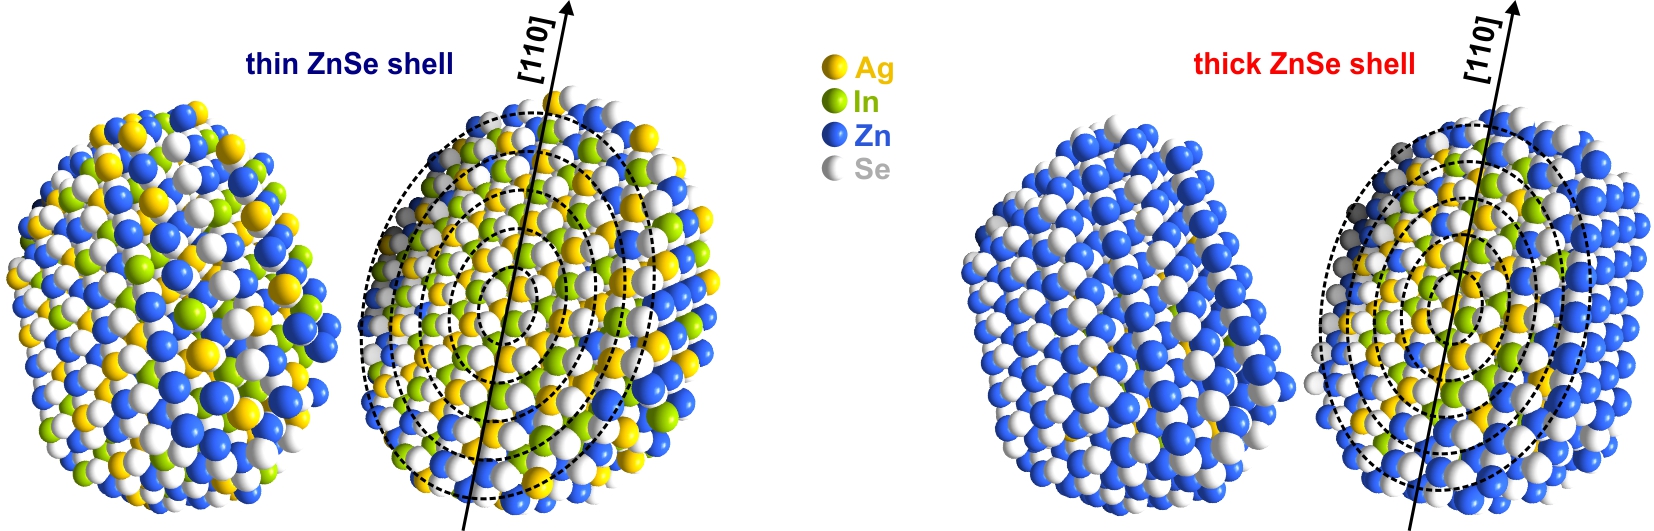 Mapping the Atomistic Structure of Graded Core/Shell Colloidal Nanocrystals